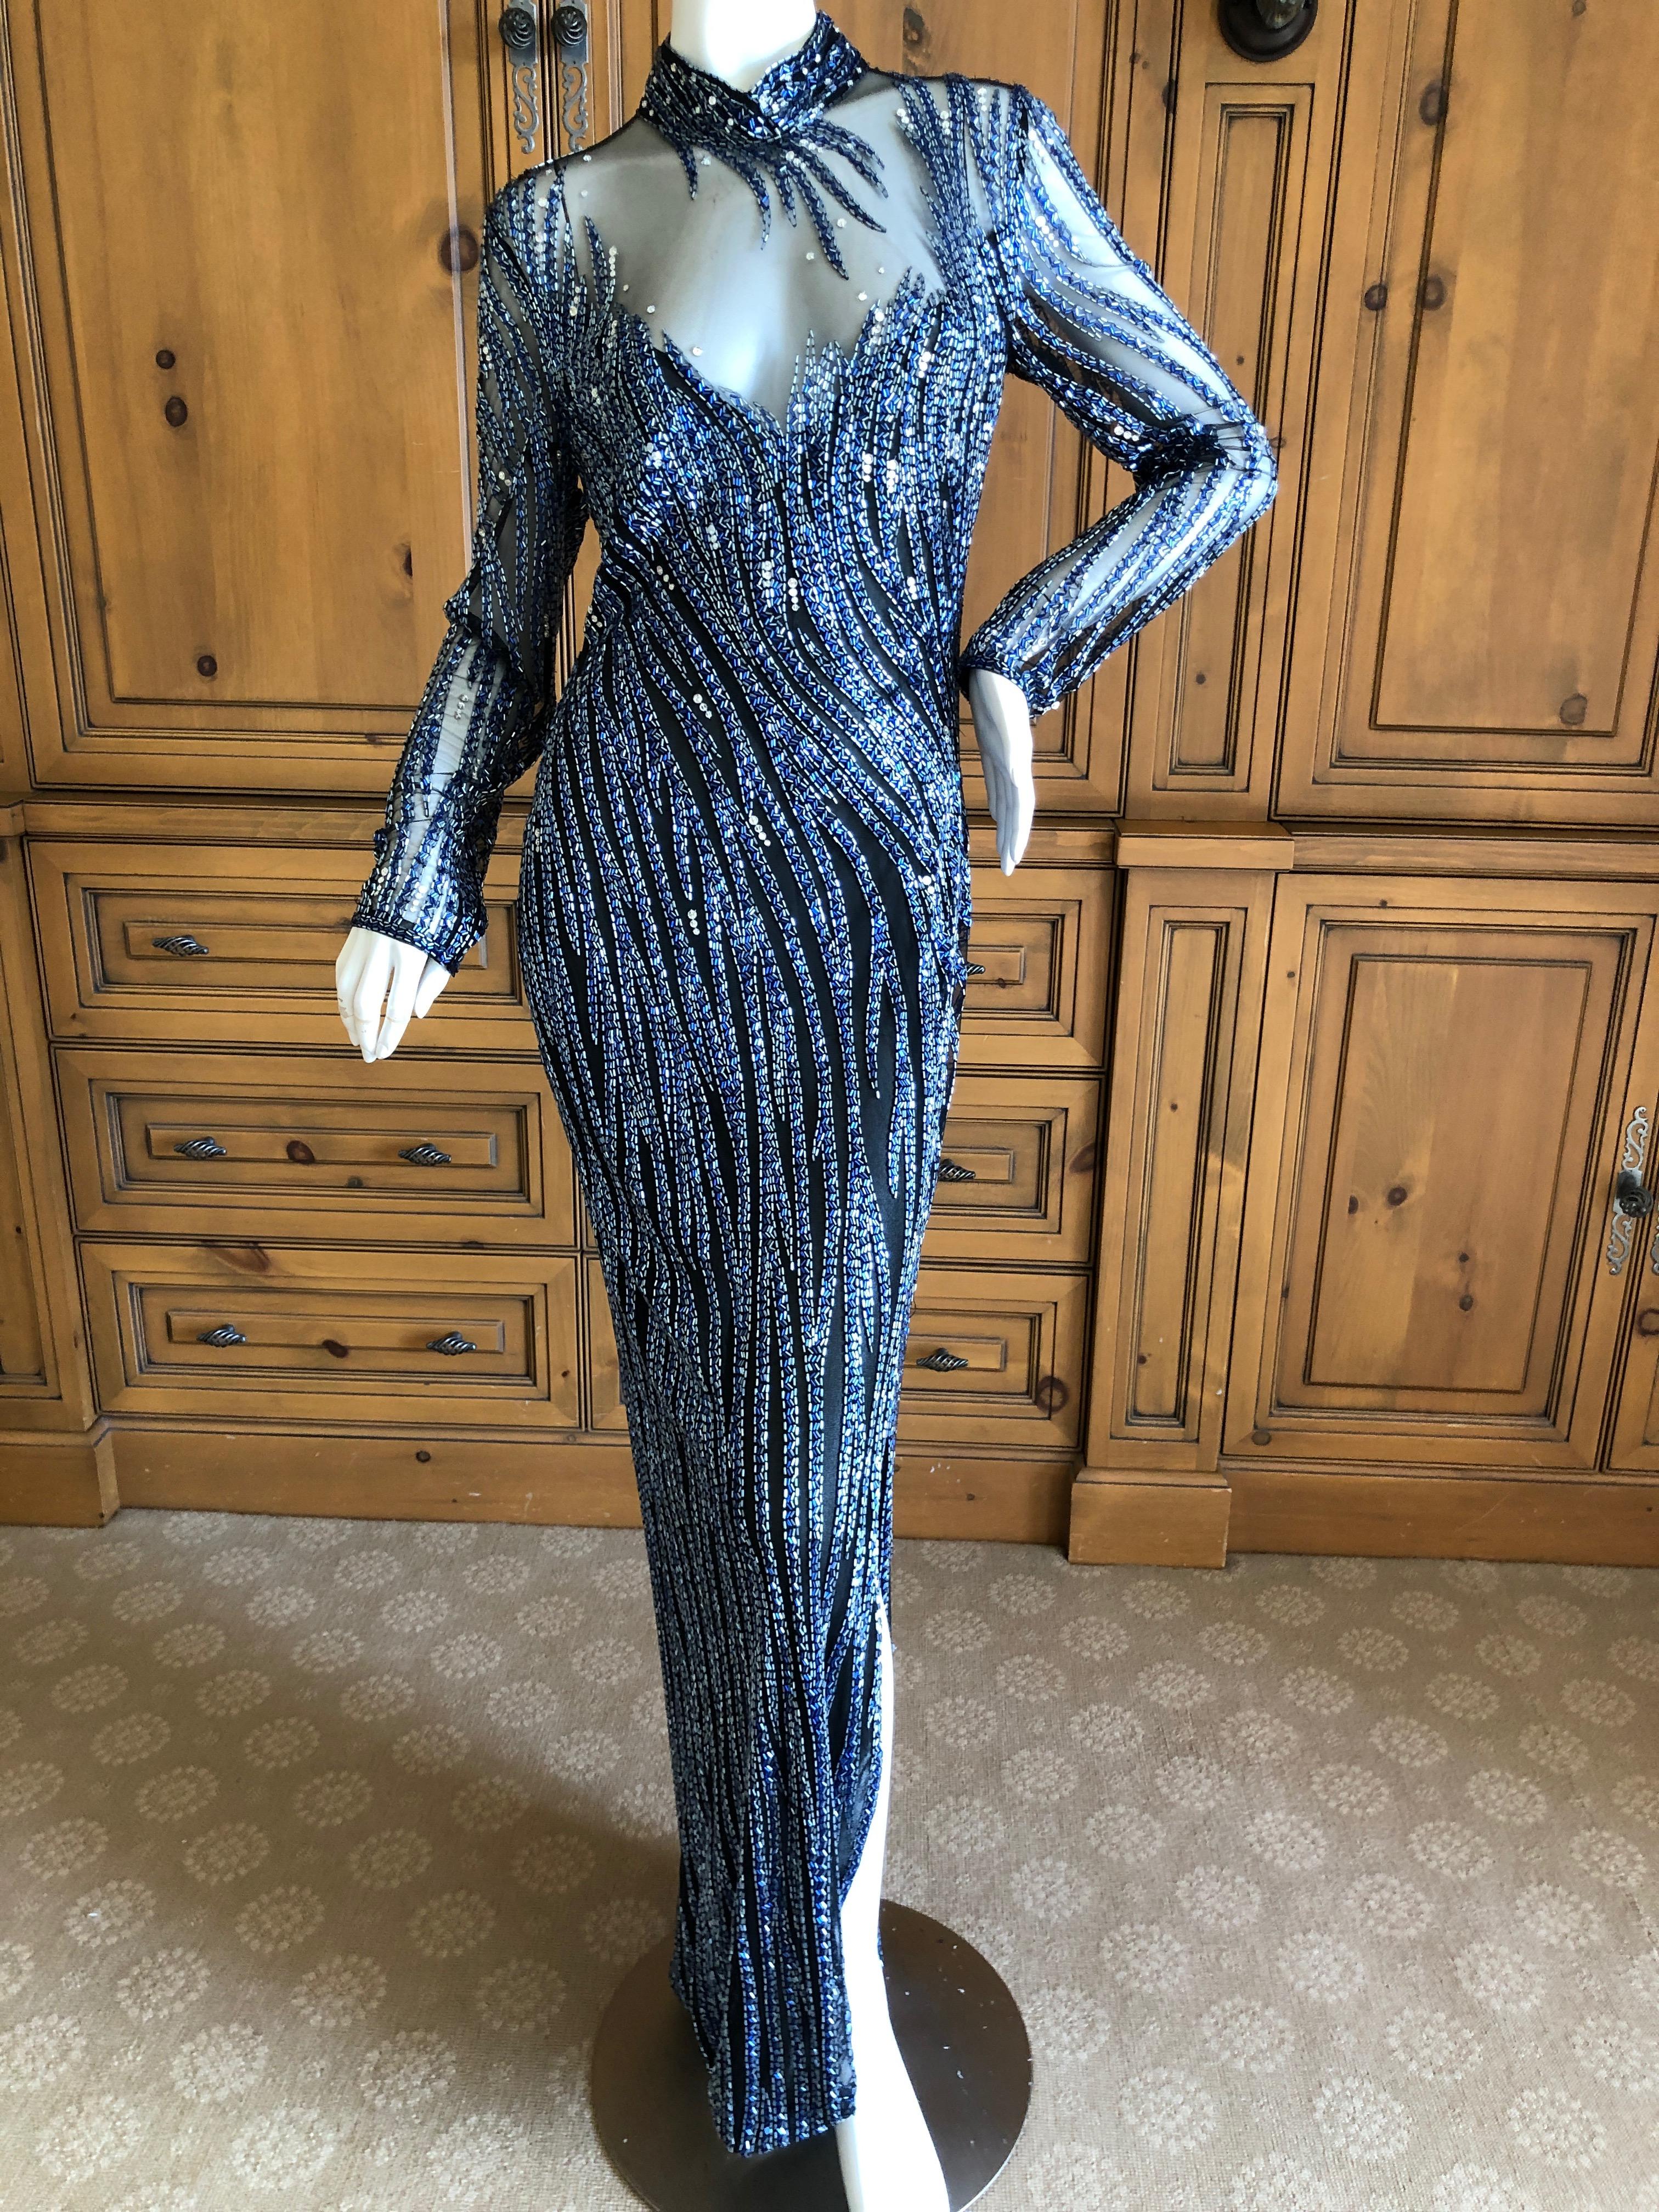 Bob Mackie Nieman Marcus 1980's Crystal Beaded Sheer Evening Dress
Sheer netting embellished with thousands of glass bugle beads, this is classic Mackie at his best.
So much prettier than the photos, please use zoom feature to see details.
Size 8-10